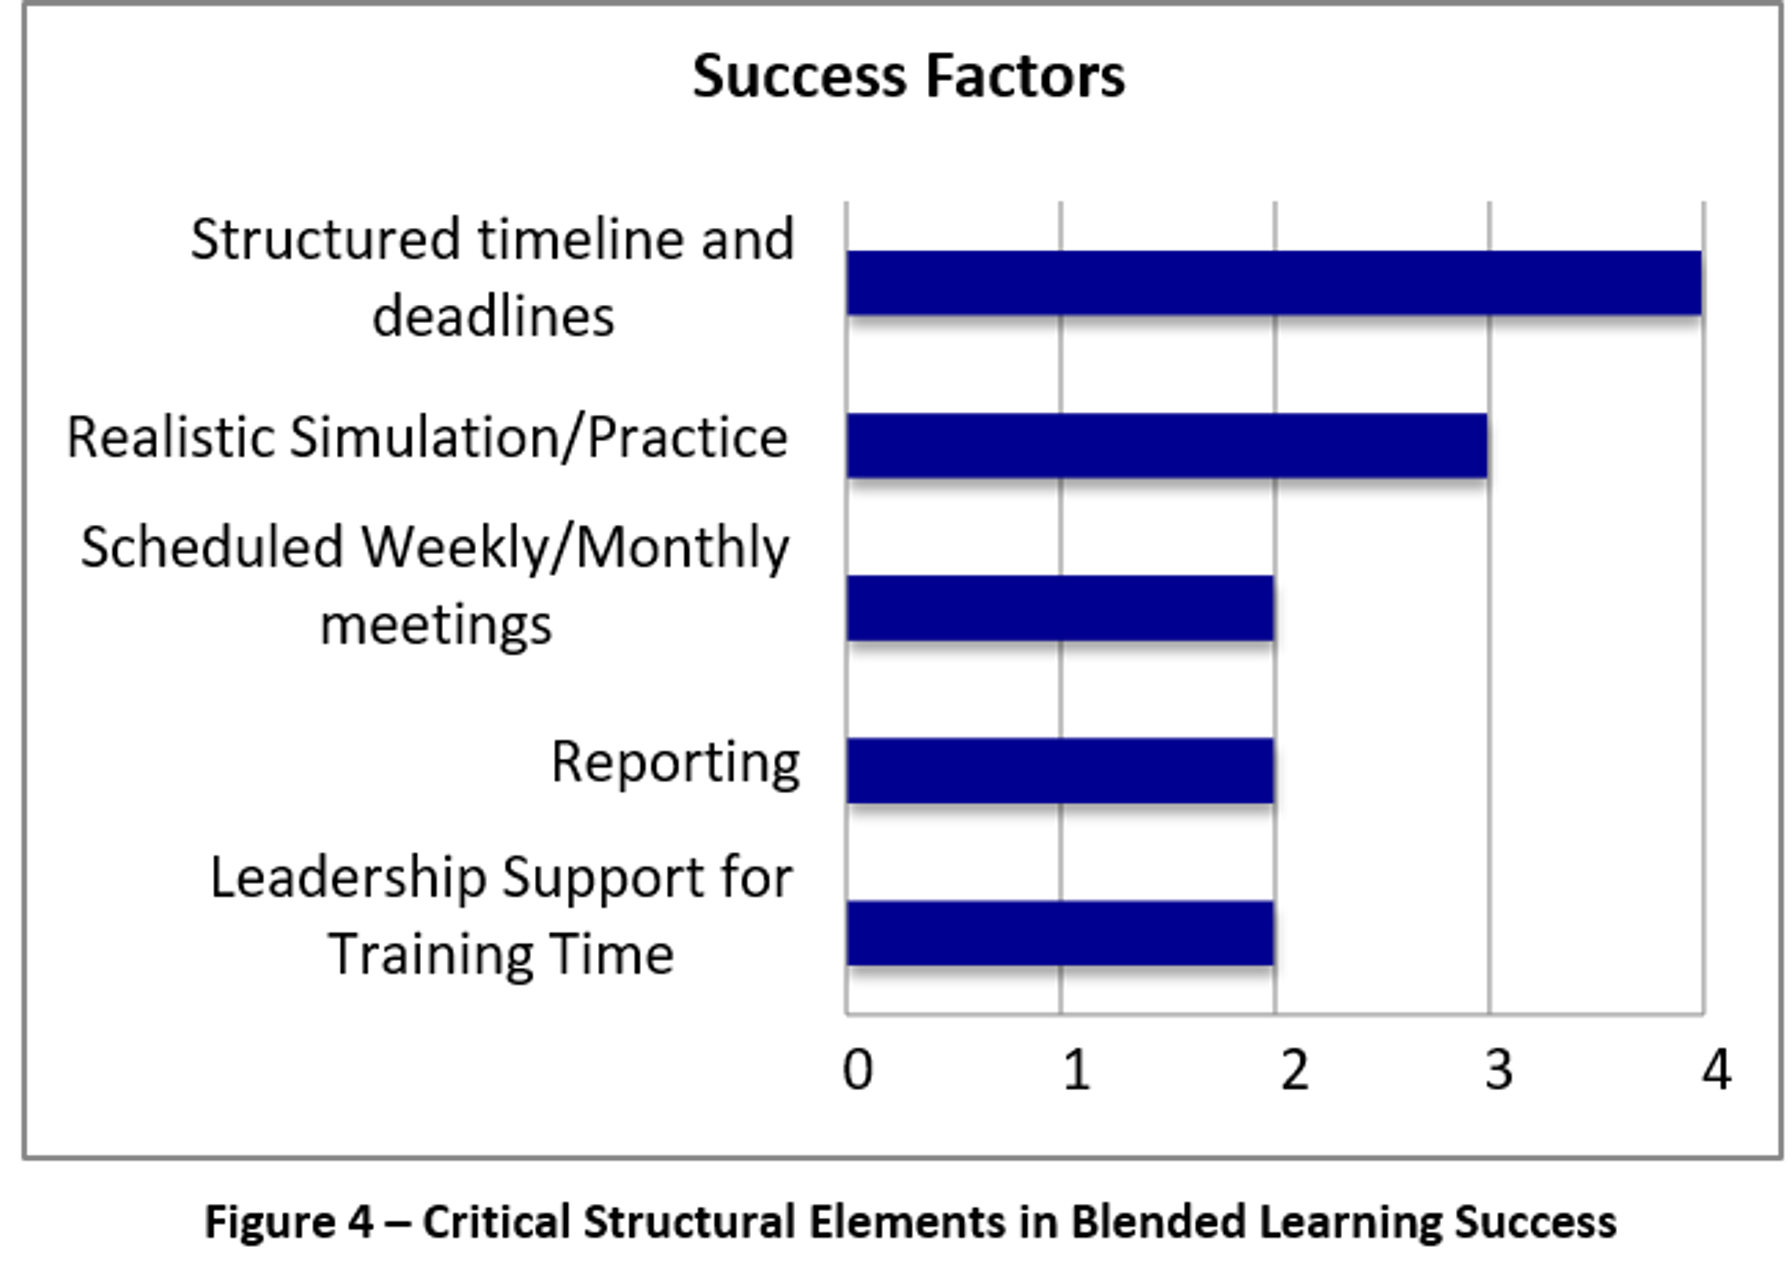 A bar chart titled Critical Structural Elements in Blended Learning Success. The values range from 0 to 4. Structured timeline and deadlines highest at 4. Next is Realistic Simulation and Practice at 3. Scheduled Weekly and Monthly Meetings is a 2. Reporting is a 2. Leadership Support for Training time is a 2.